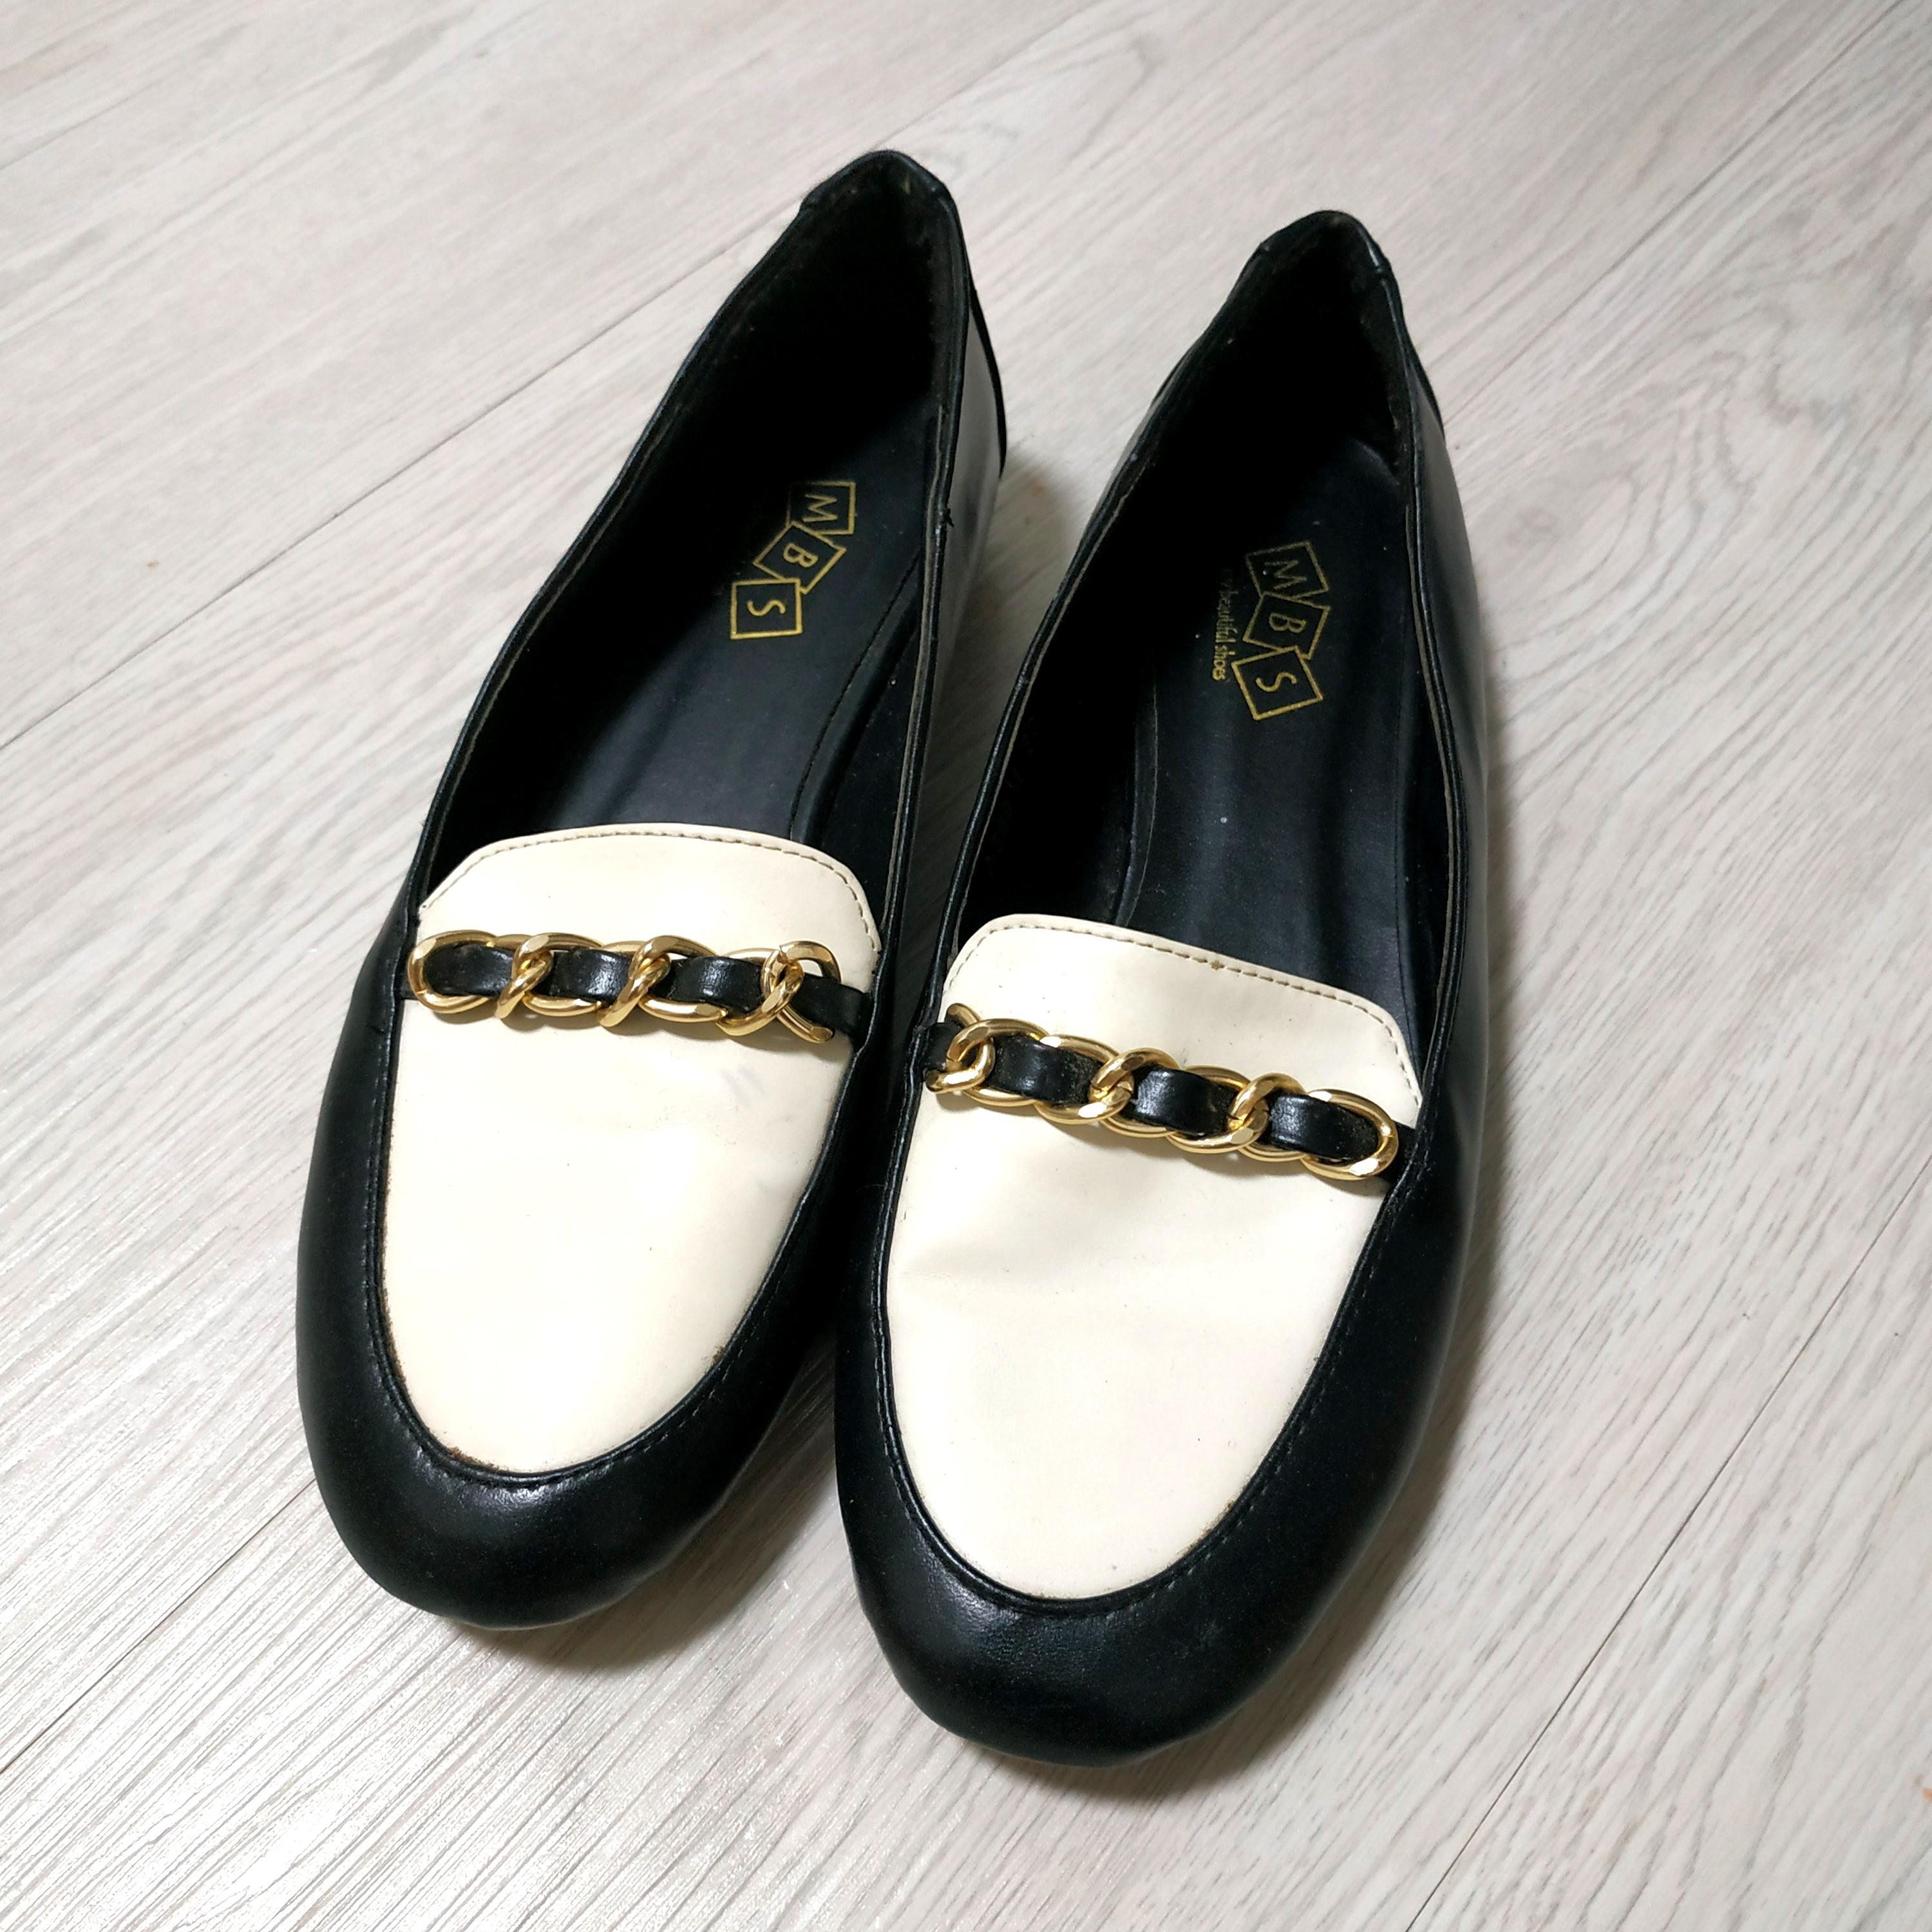 black and white flats women's shoes